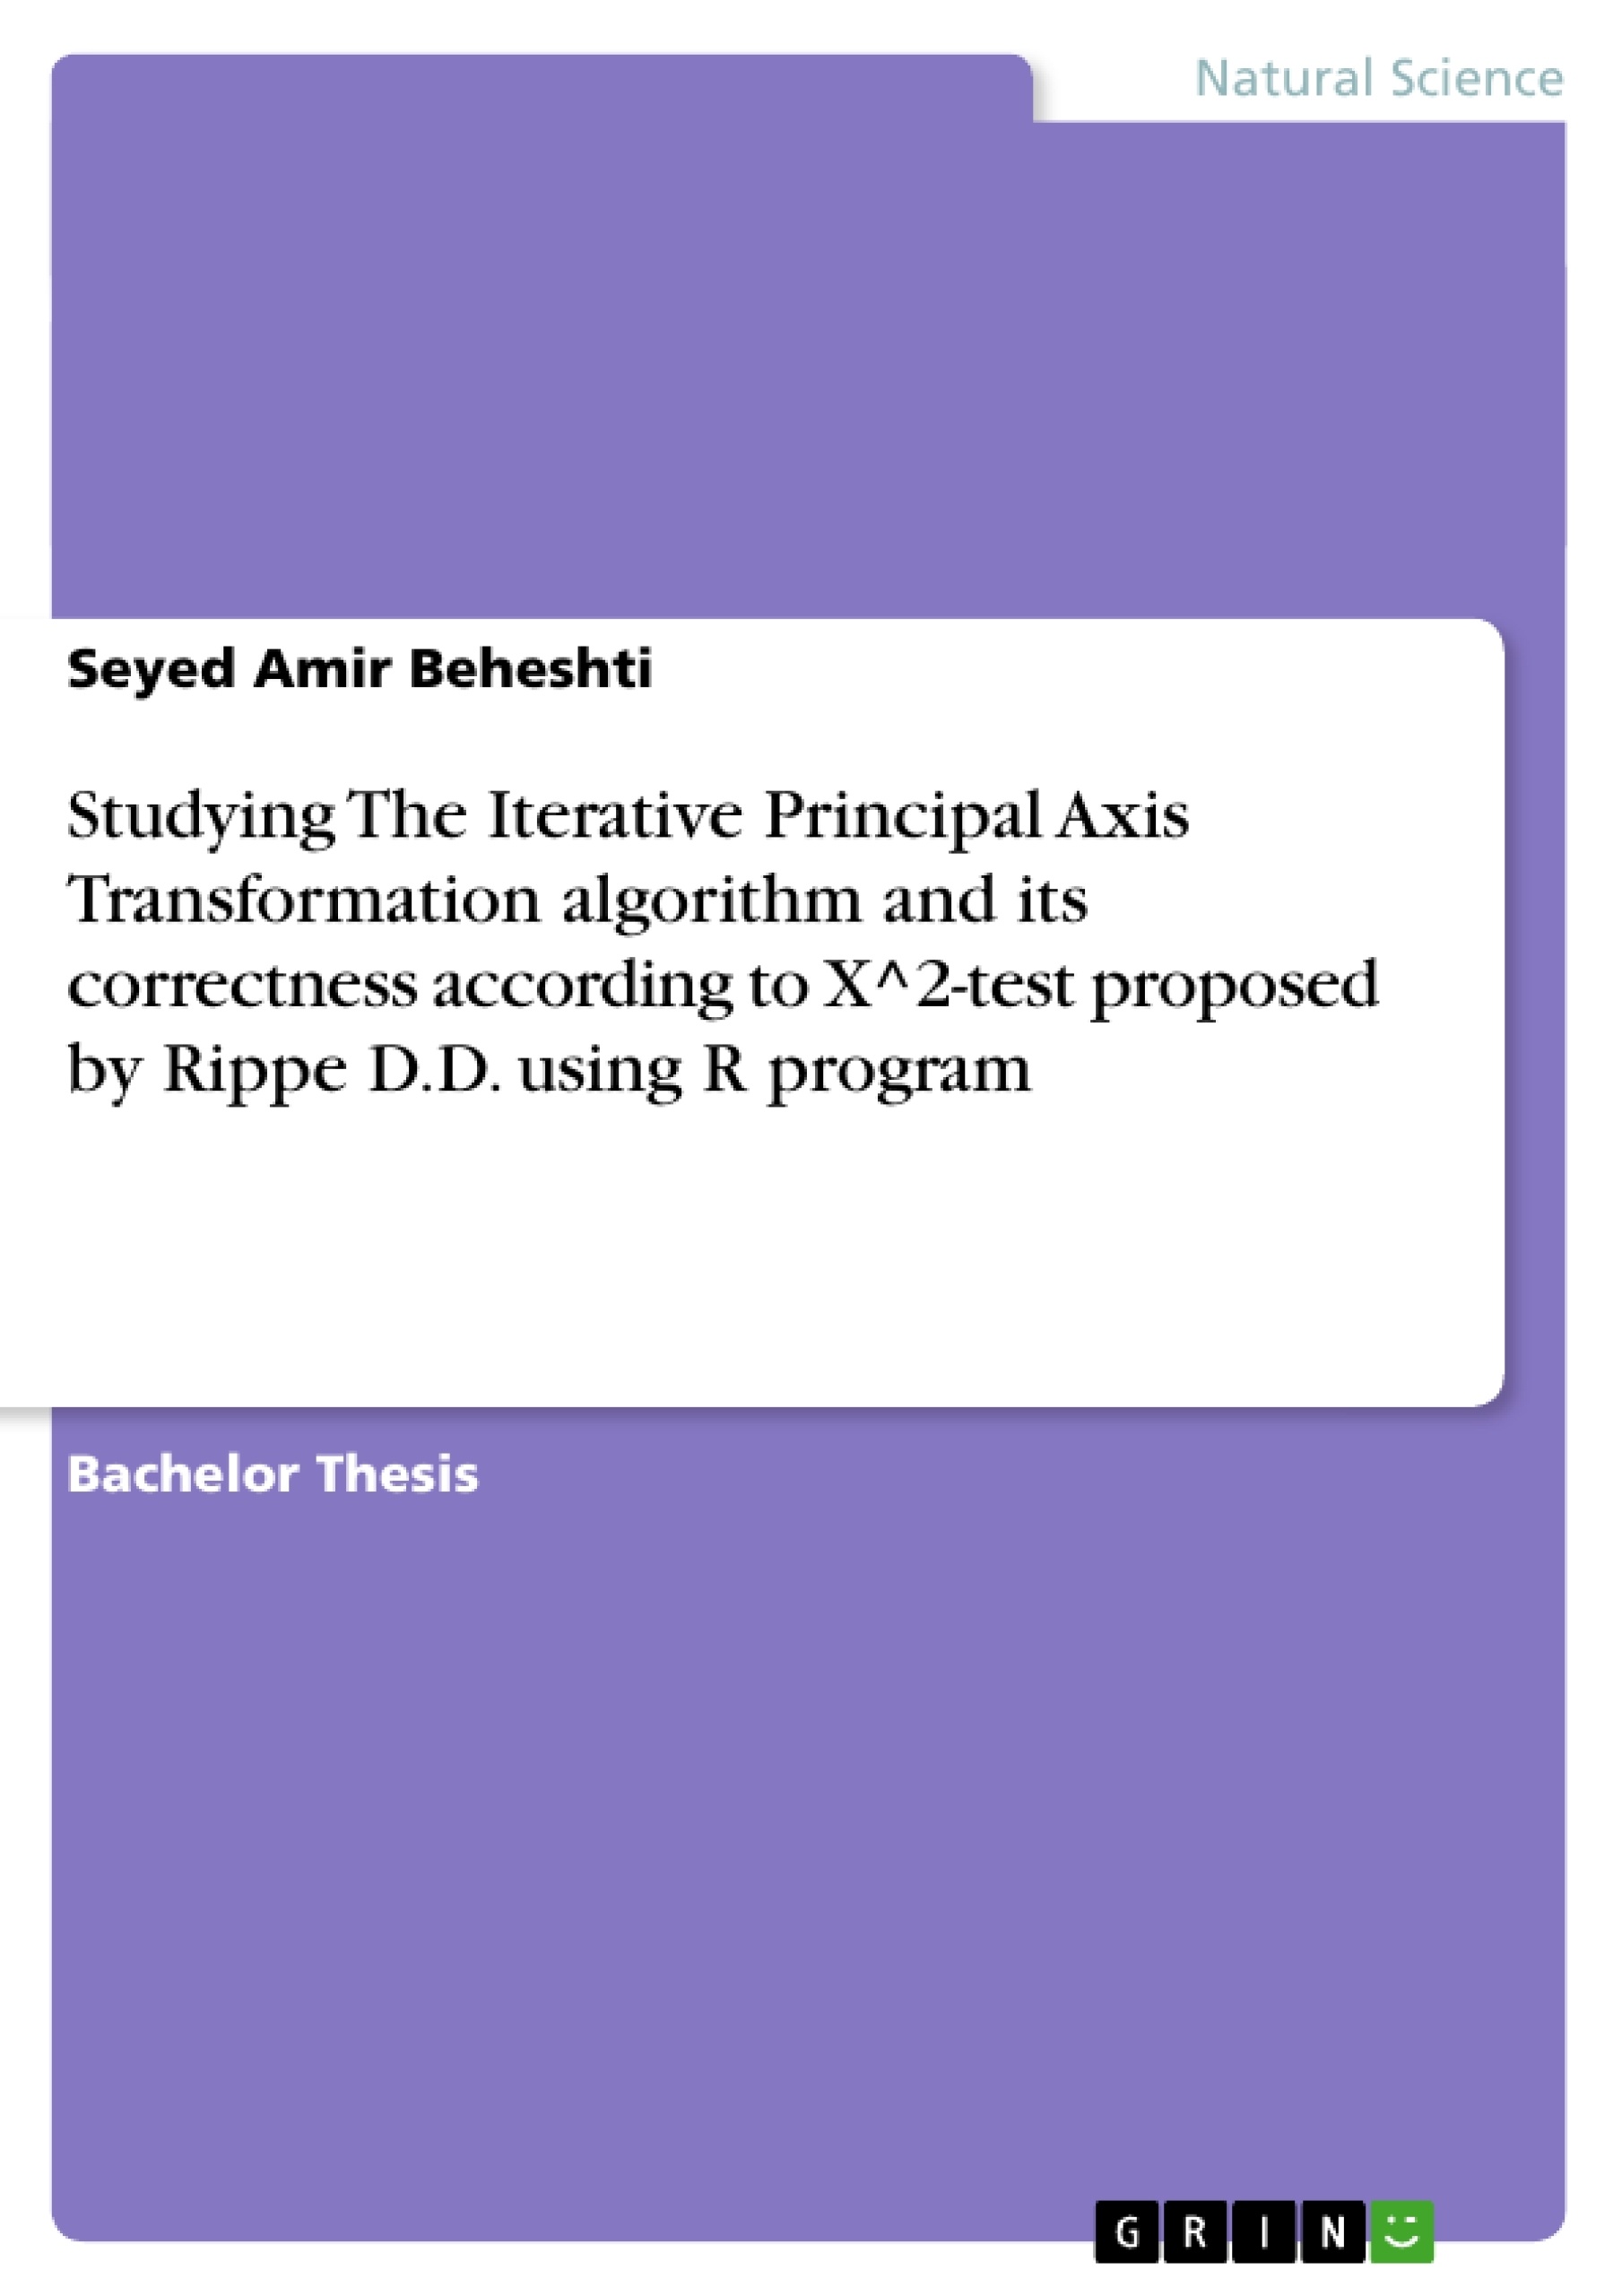 Título: Studying The Iterative Principal Axis Transformation algorithm and its correctness according to X^2-test proposed by Rippe D.D. using R program